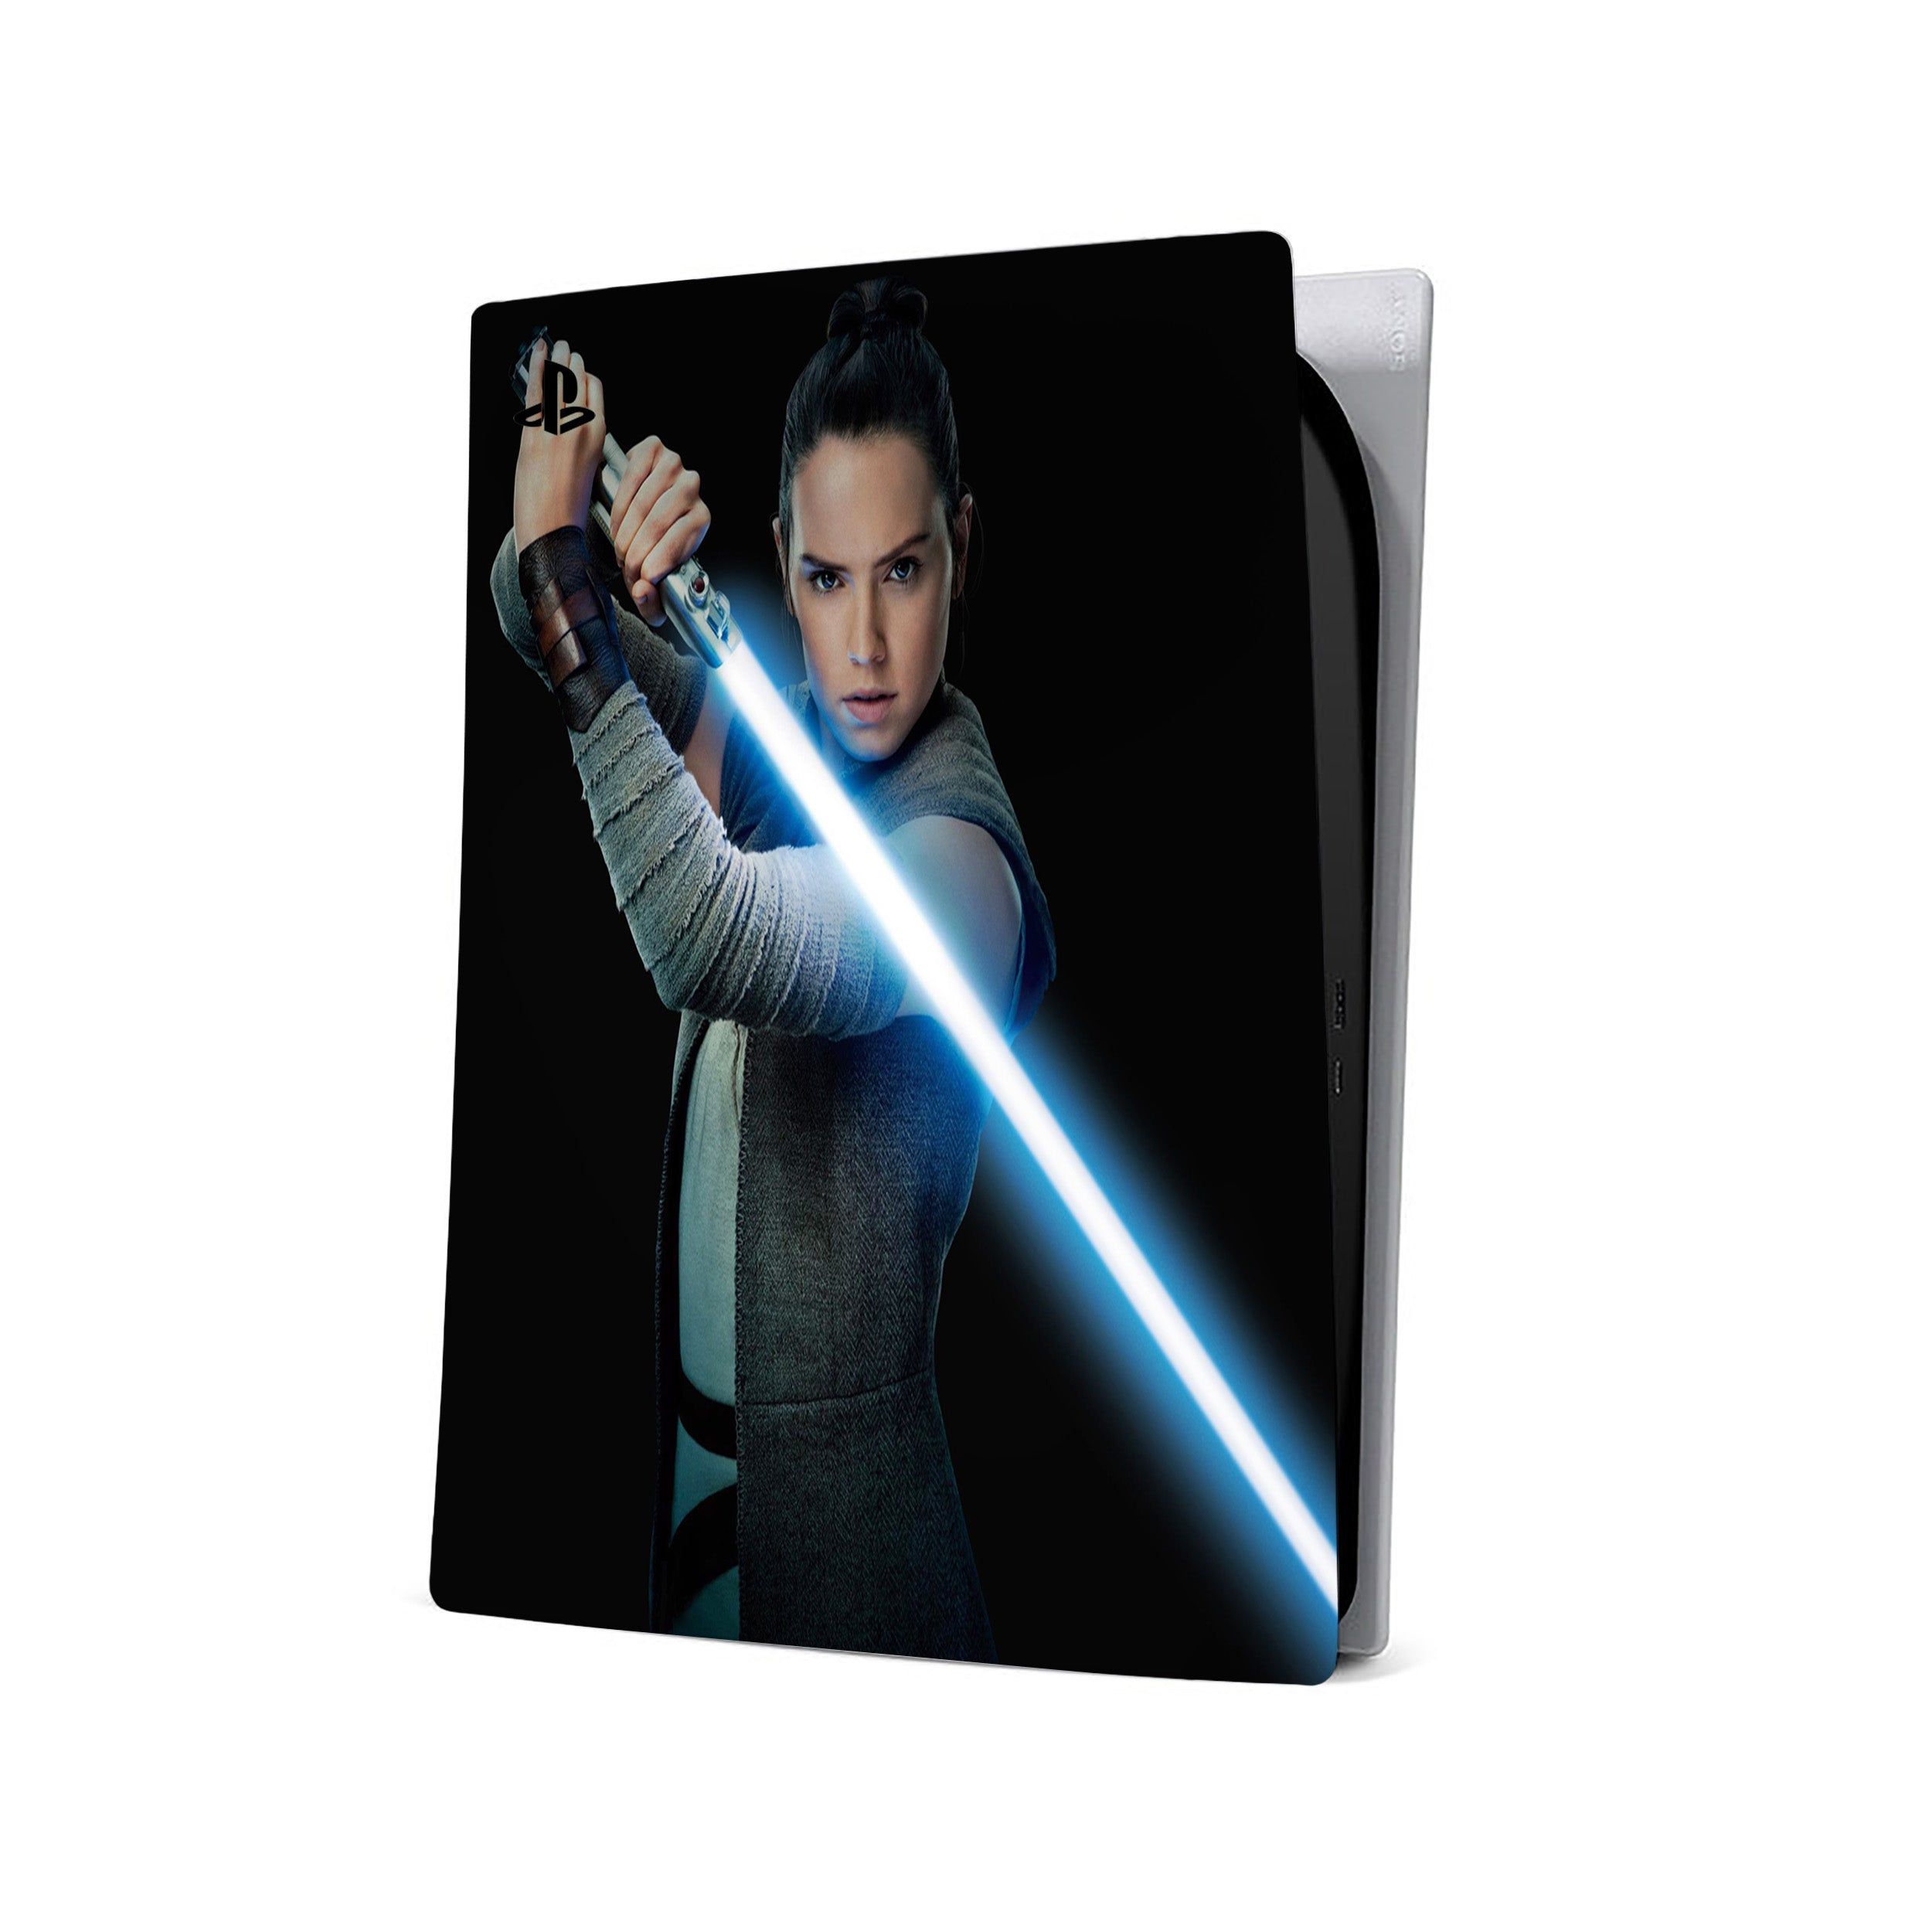 A video game skin featuring a Star Wars Rey design for the PS5.